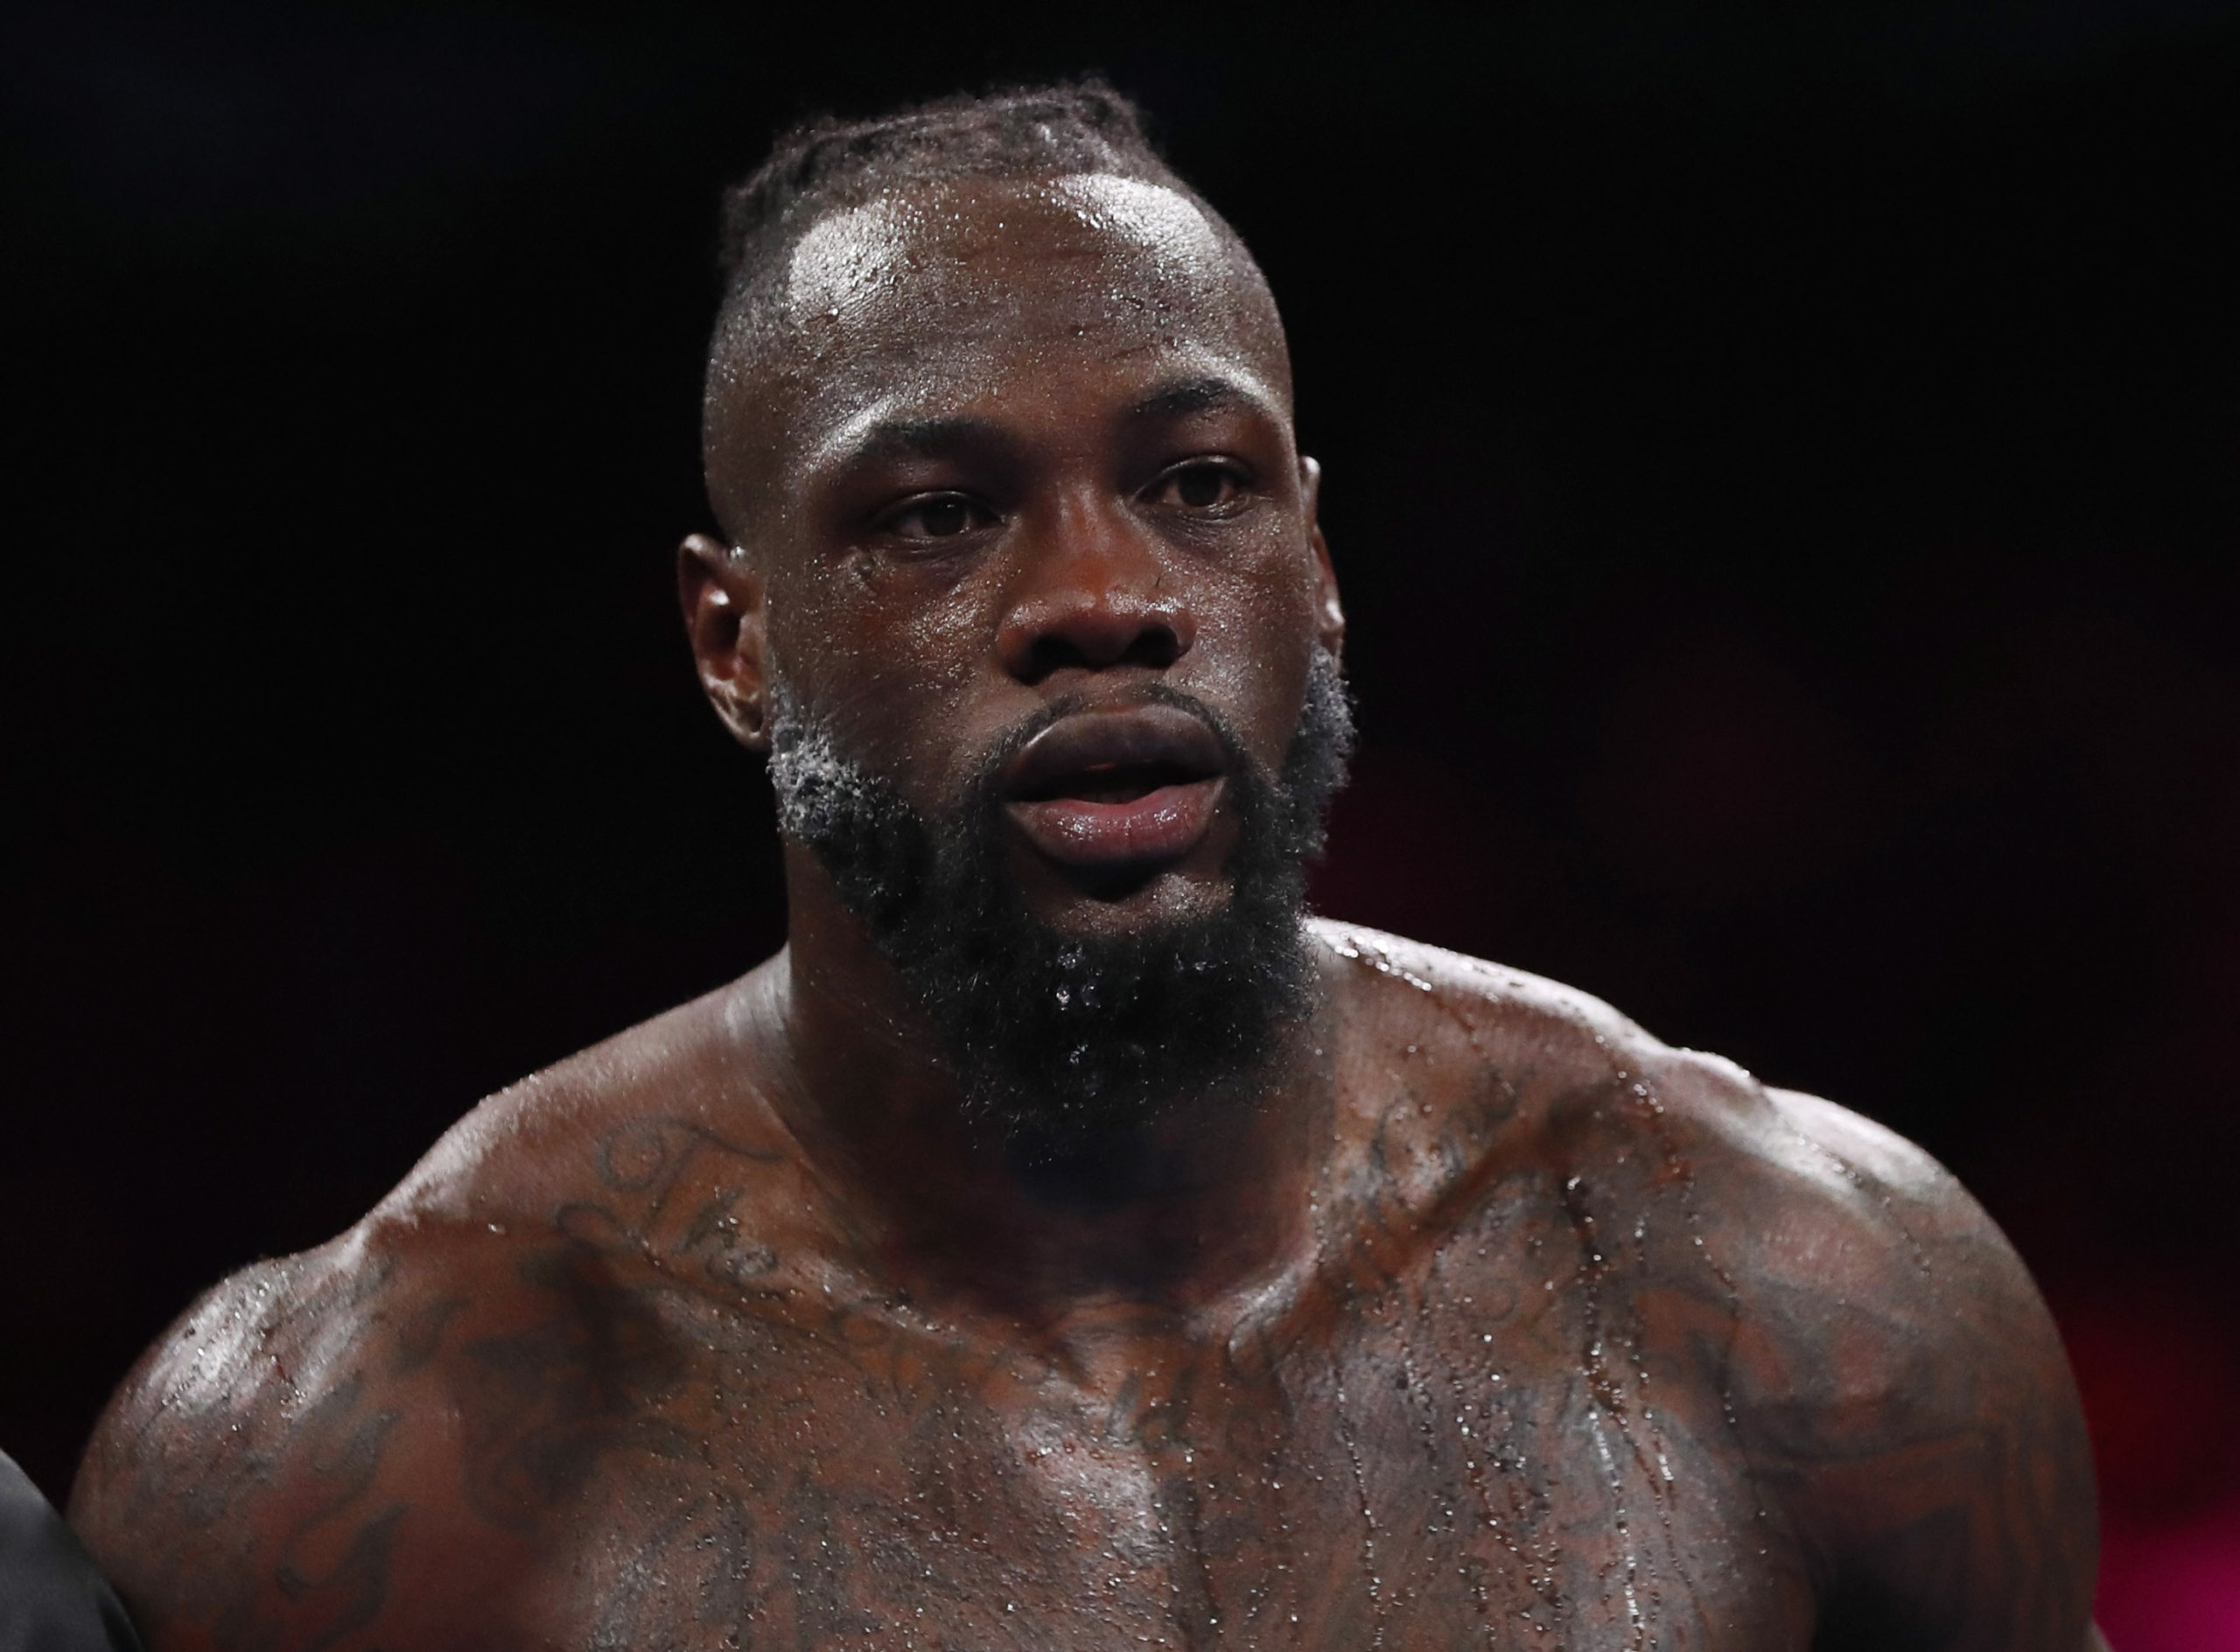 FILE PHOTO: Boxing - Tyson Fury v Deontay Wilder - WBC Heavyweight Title - T-Mobile Arena, Las Vegas, Nevada, U.S. - October 9, 2021  Deontay Wilder during the fight in his corner